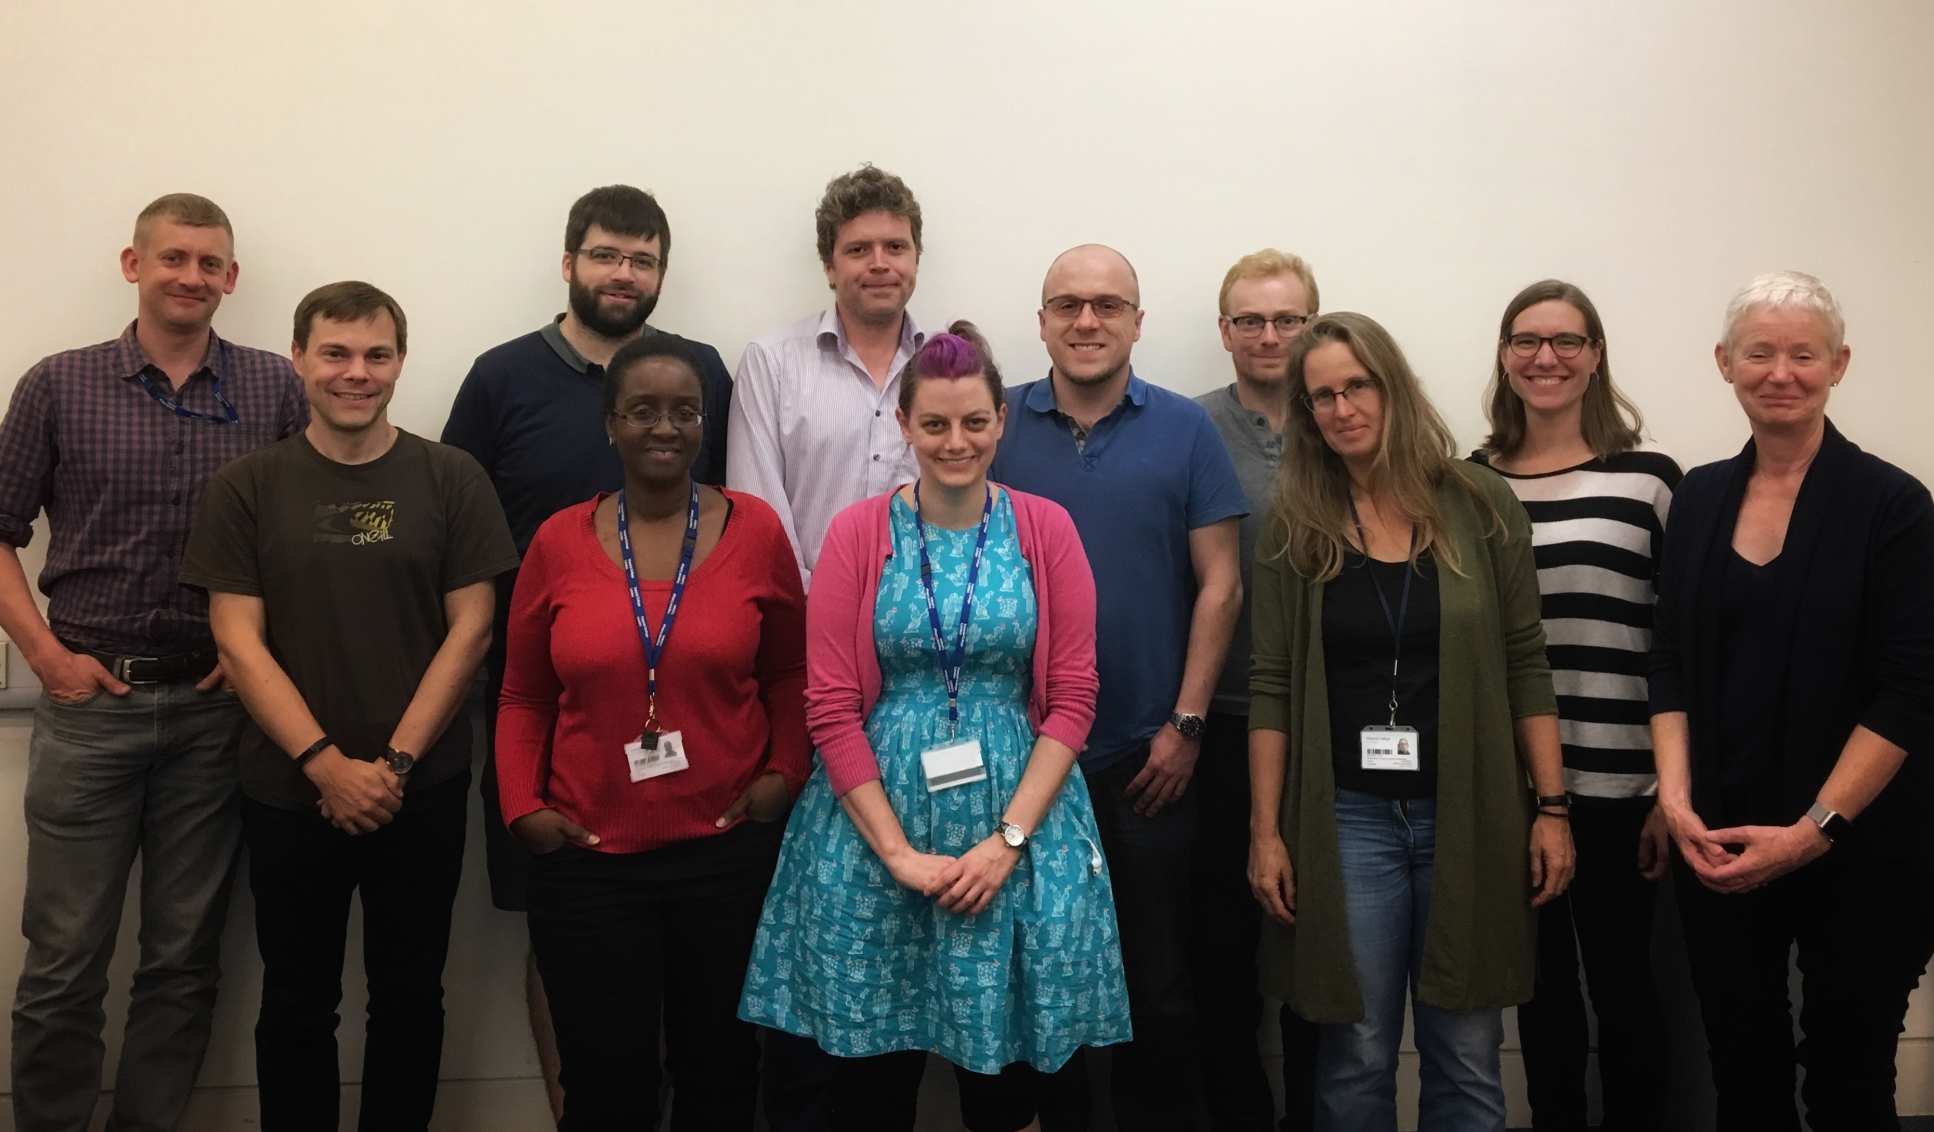 Earth Science and Engineering Staff who completed Mental Health Training pose together for a photo